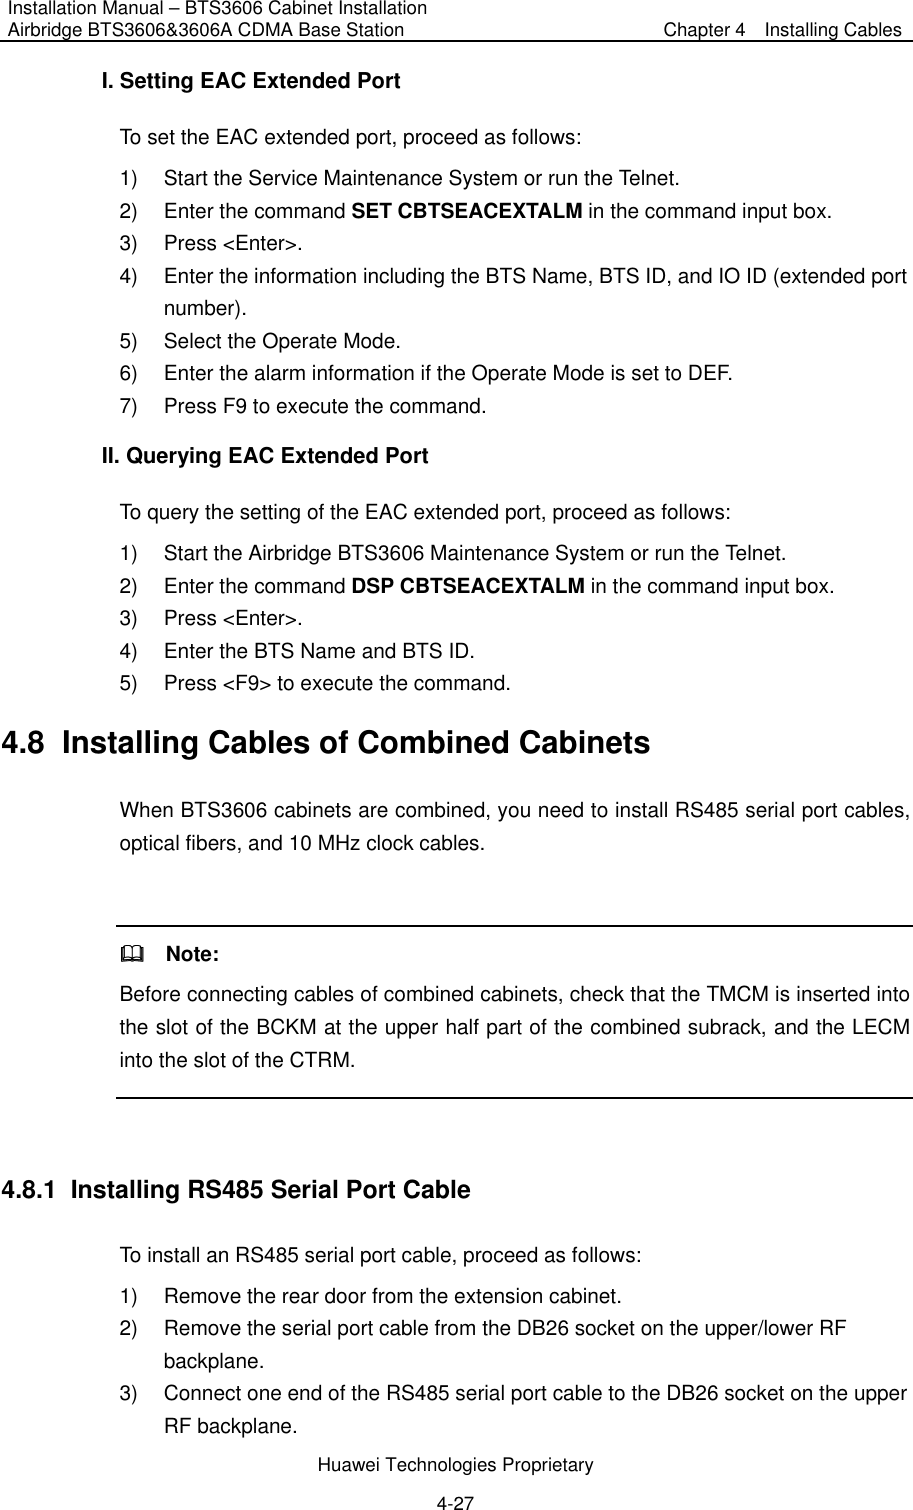 Installation Manual – BTS3606 Cabinet Installation Airbridge BTS3606&amp;3606A CDMA Base Station  Chapter 4    Installing Cables  Huawei Technologies Proprietary 4-27 I. Setting EAC Extended Port To set the EAC extended port, proceed as follows: 1)  Start the Service Maintenance System or run the Telnet. 2)  Enter the command SET CBTSEACEXTALM in the command input box. 3) Press &lt;Enter&gt;. 4)  Enter the information including the BTS Name, BTS ID, and IO ID (extended port number).  5)  Select the Operate Mode.   6)  Enter the alarm information if the Operate Mode is set to DEF. 7)  Press F9 to execute the command. II. Querying EAC Extended Port To query the setting of the EAC extended port, proceed as follows: 1)  Start the Airbridge BTS3606 Maintenance System or run the Telnet. 2)  Enter the command DSP CBTSEACEXTALM in the command input box. 3) Press &lt;Enter&gt;. 4)  Enter the BTS Name and BTS ID. 5)  Press &lt;F9&gt; to execute the command. 4.8  Installing Cables of Combined Cabinets When BTS3606 cabinets are combined, you need to install RS485 serial port cables, optical fibers, and 10 MHz clock cables.    Note:  Before connecting cables of combined cabinets, check that the TMCM is inserted into the slot of the BCKM at the upper half part of the combined subrack, and the LECM into the slot of the CTRM.  4.8.1  Installing RS485 Serial Port Cable To install an RS485 serial port cable, proceed as follows:   1)  Remove the rear door from the extension cabinet. 2)  Remove the serial port cable from the DB26 socket on the upper/lower RF backplane. 3)  Connect one end of the RS485 serial port cable to the DB26 socket on the upper RF backplane. 